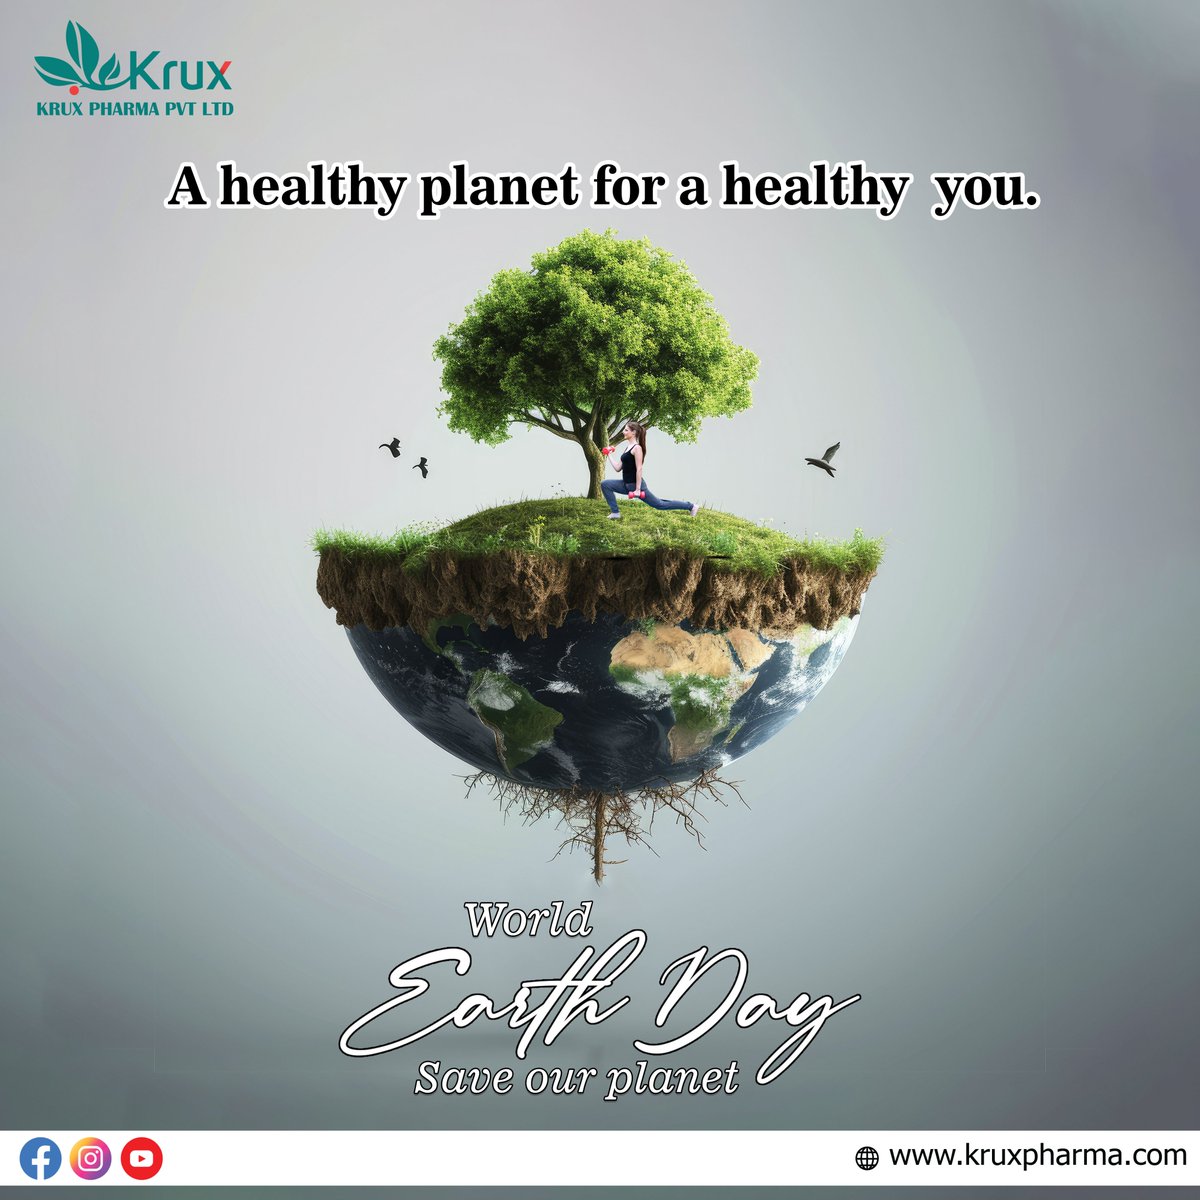 This #WorldEarthDay, Krux Pharma reaffirms its commitment to health - for people and the planet. 

Together, let's create a healthier future.

#WorldEarthDay2024 #WorldEarthDay #EarthDay #kruxpharmaceutical #kruxpharma #FacebookPage #facebookviral #pagelike #pagefollowers